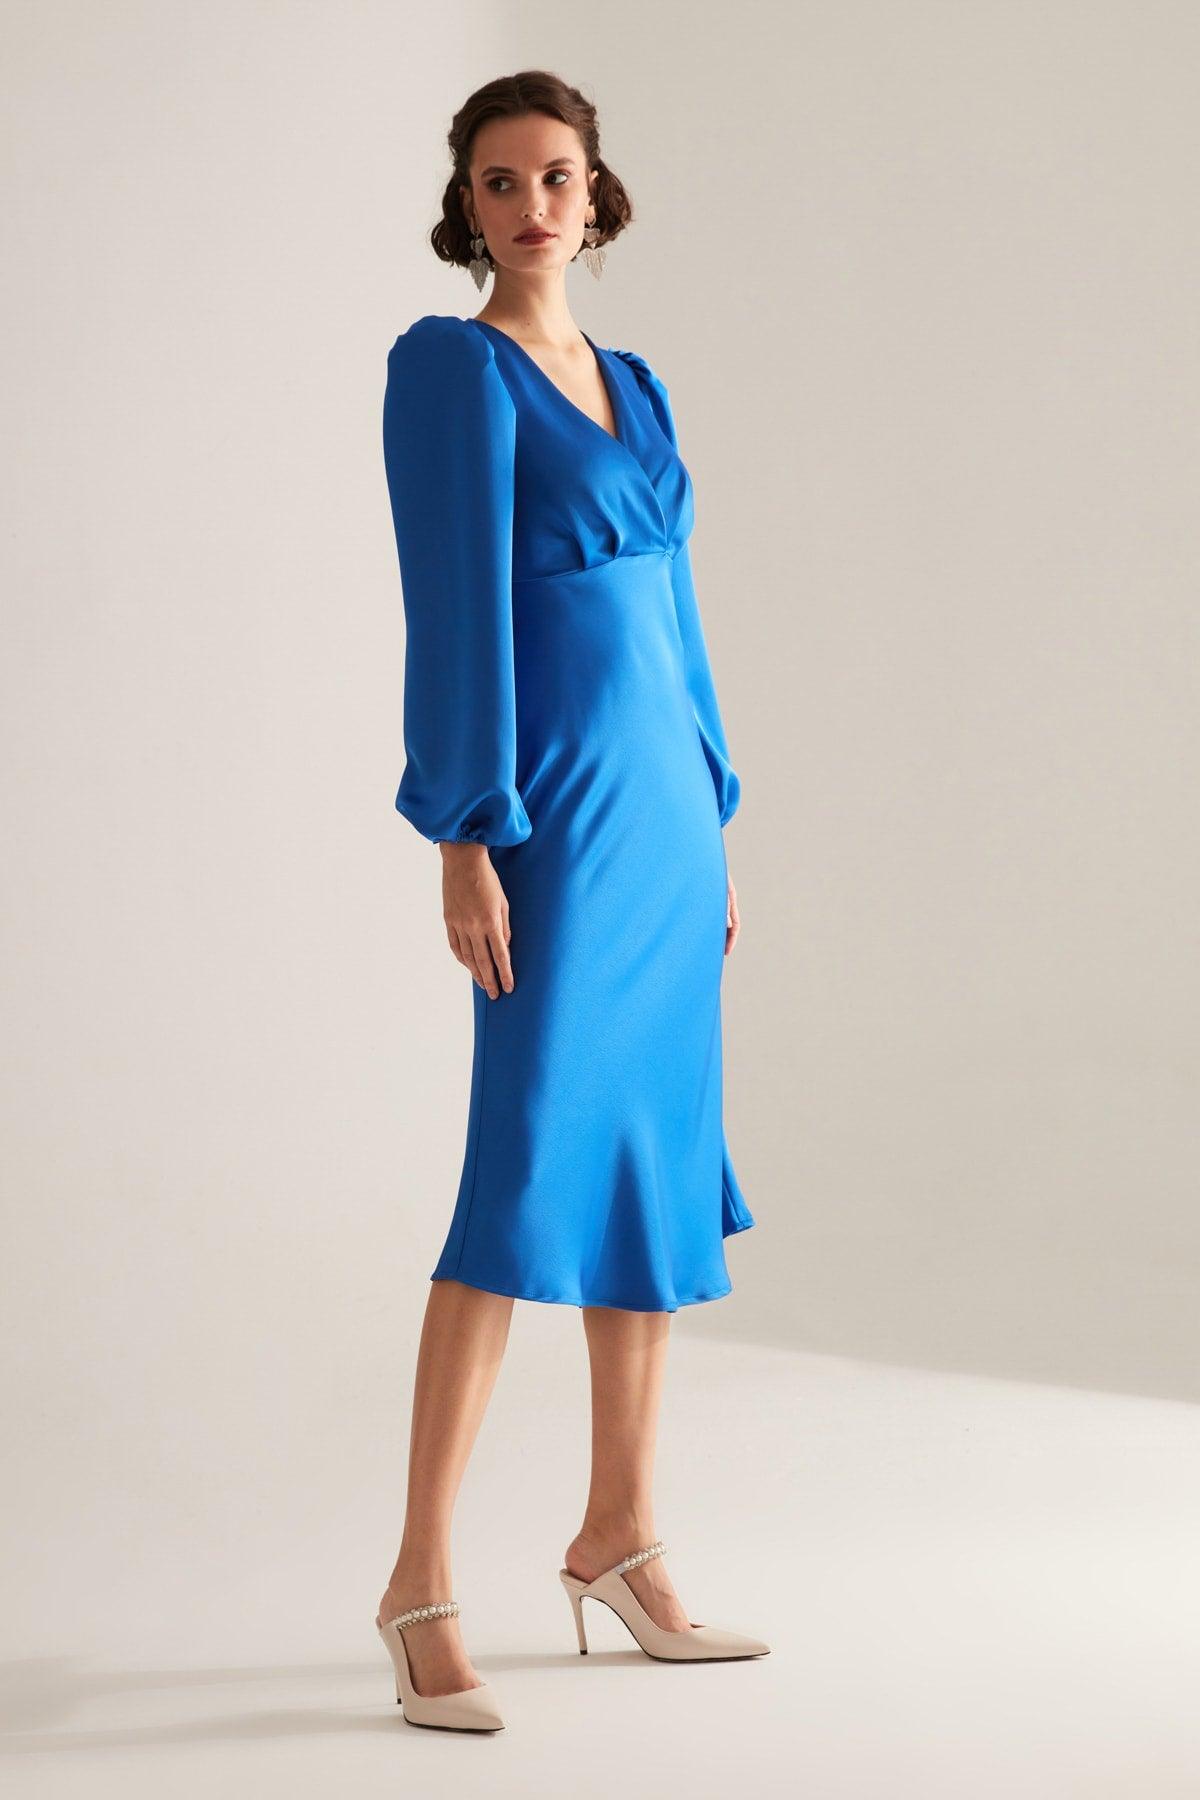 Merry Blue Double Breasted Collar Flared Dress - Swordslife